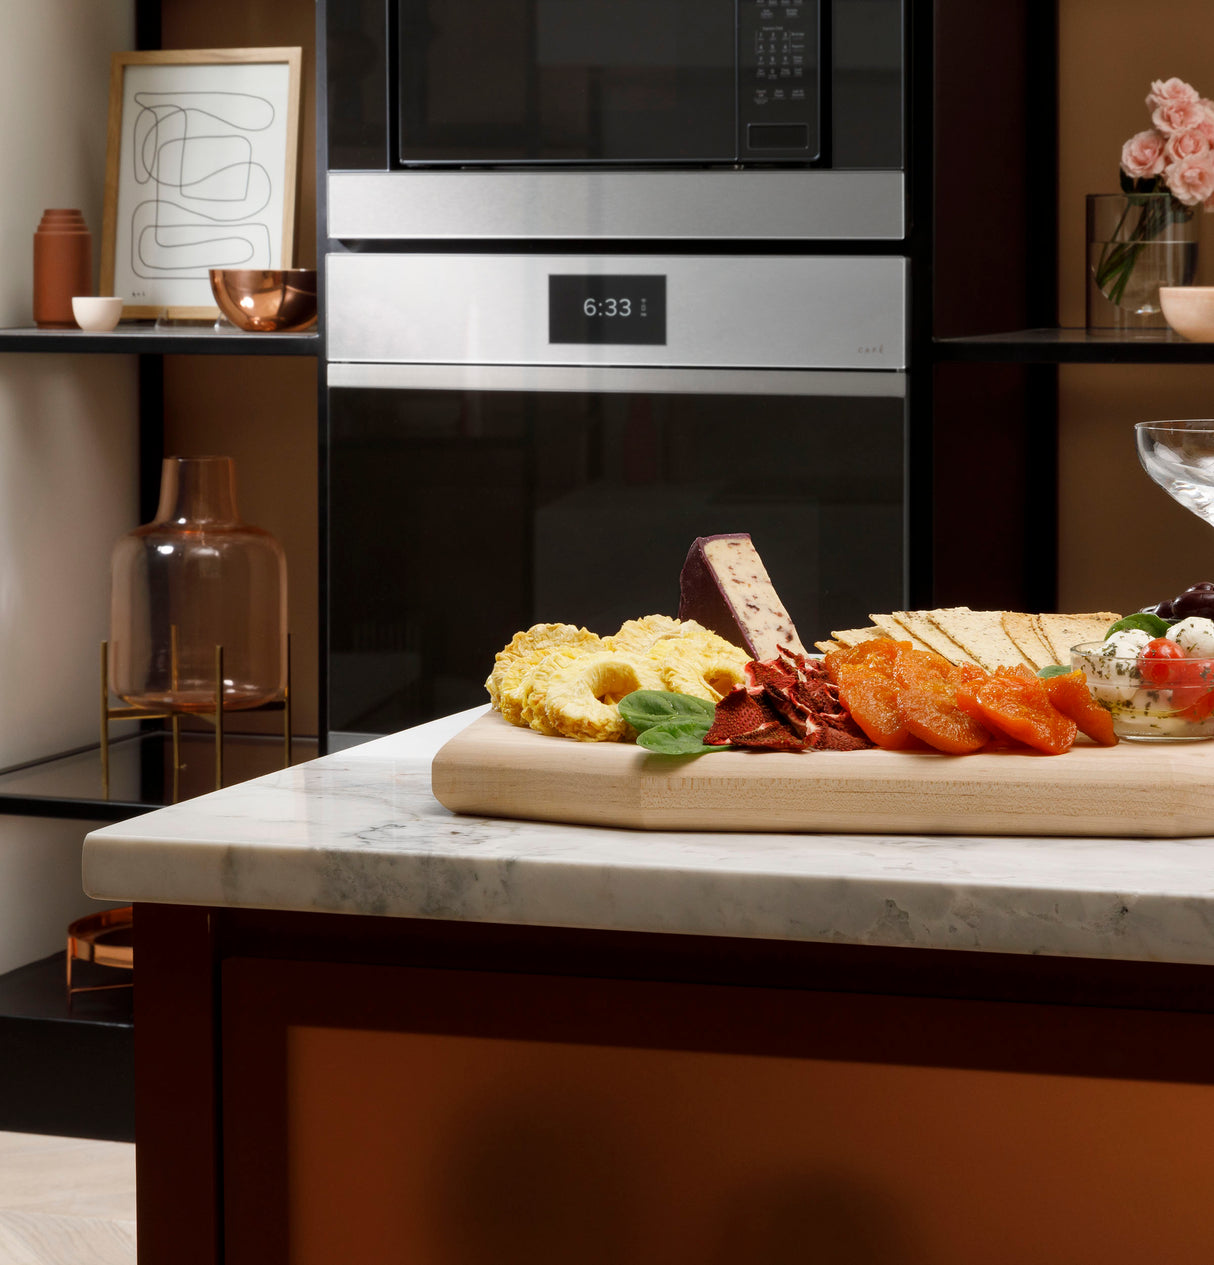 Caf(eback)(TM) 30" Smart Built-In Convection Single Wall Oven in Platinum Glass - (CTS90DM2NS5)